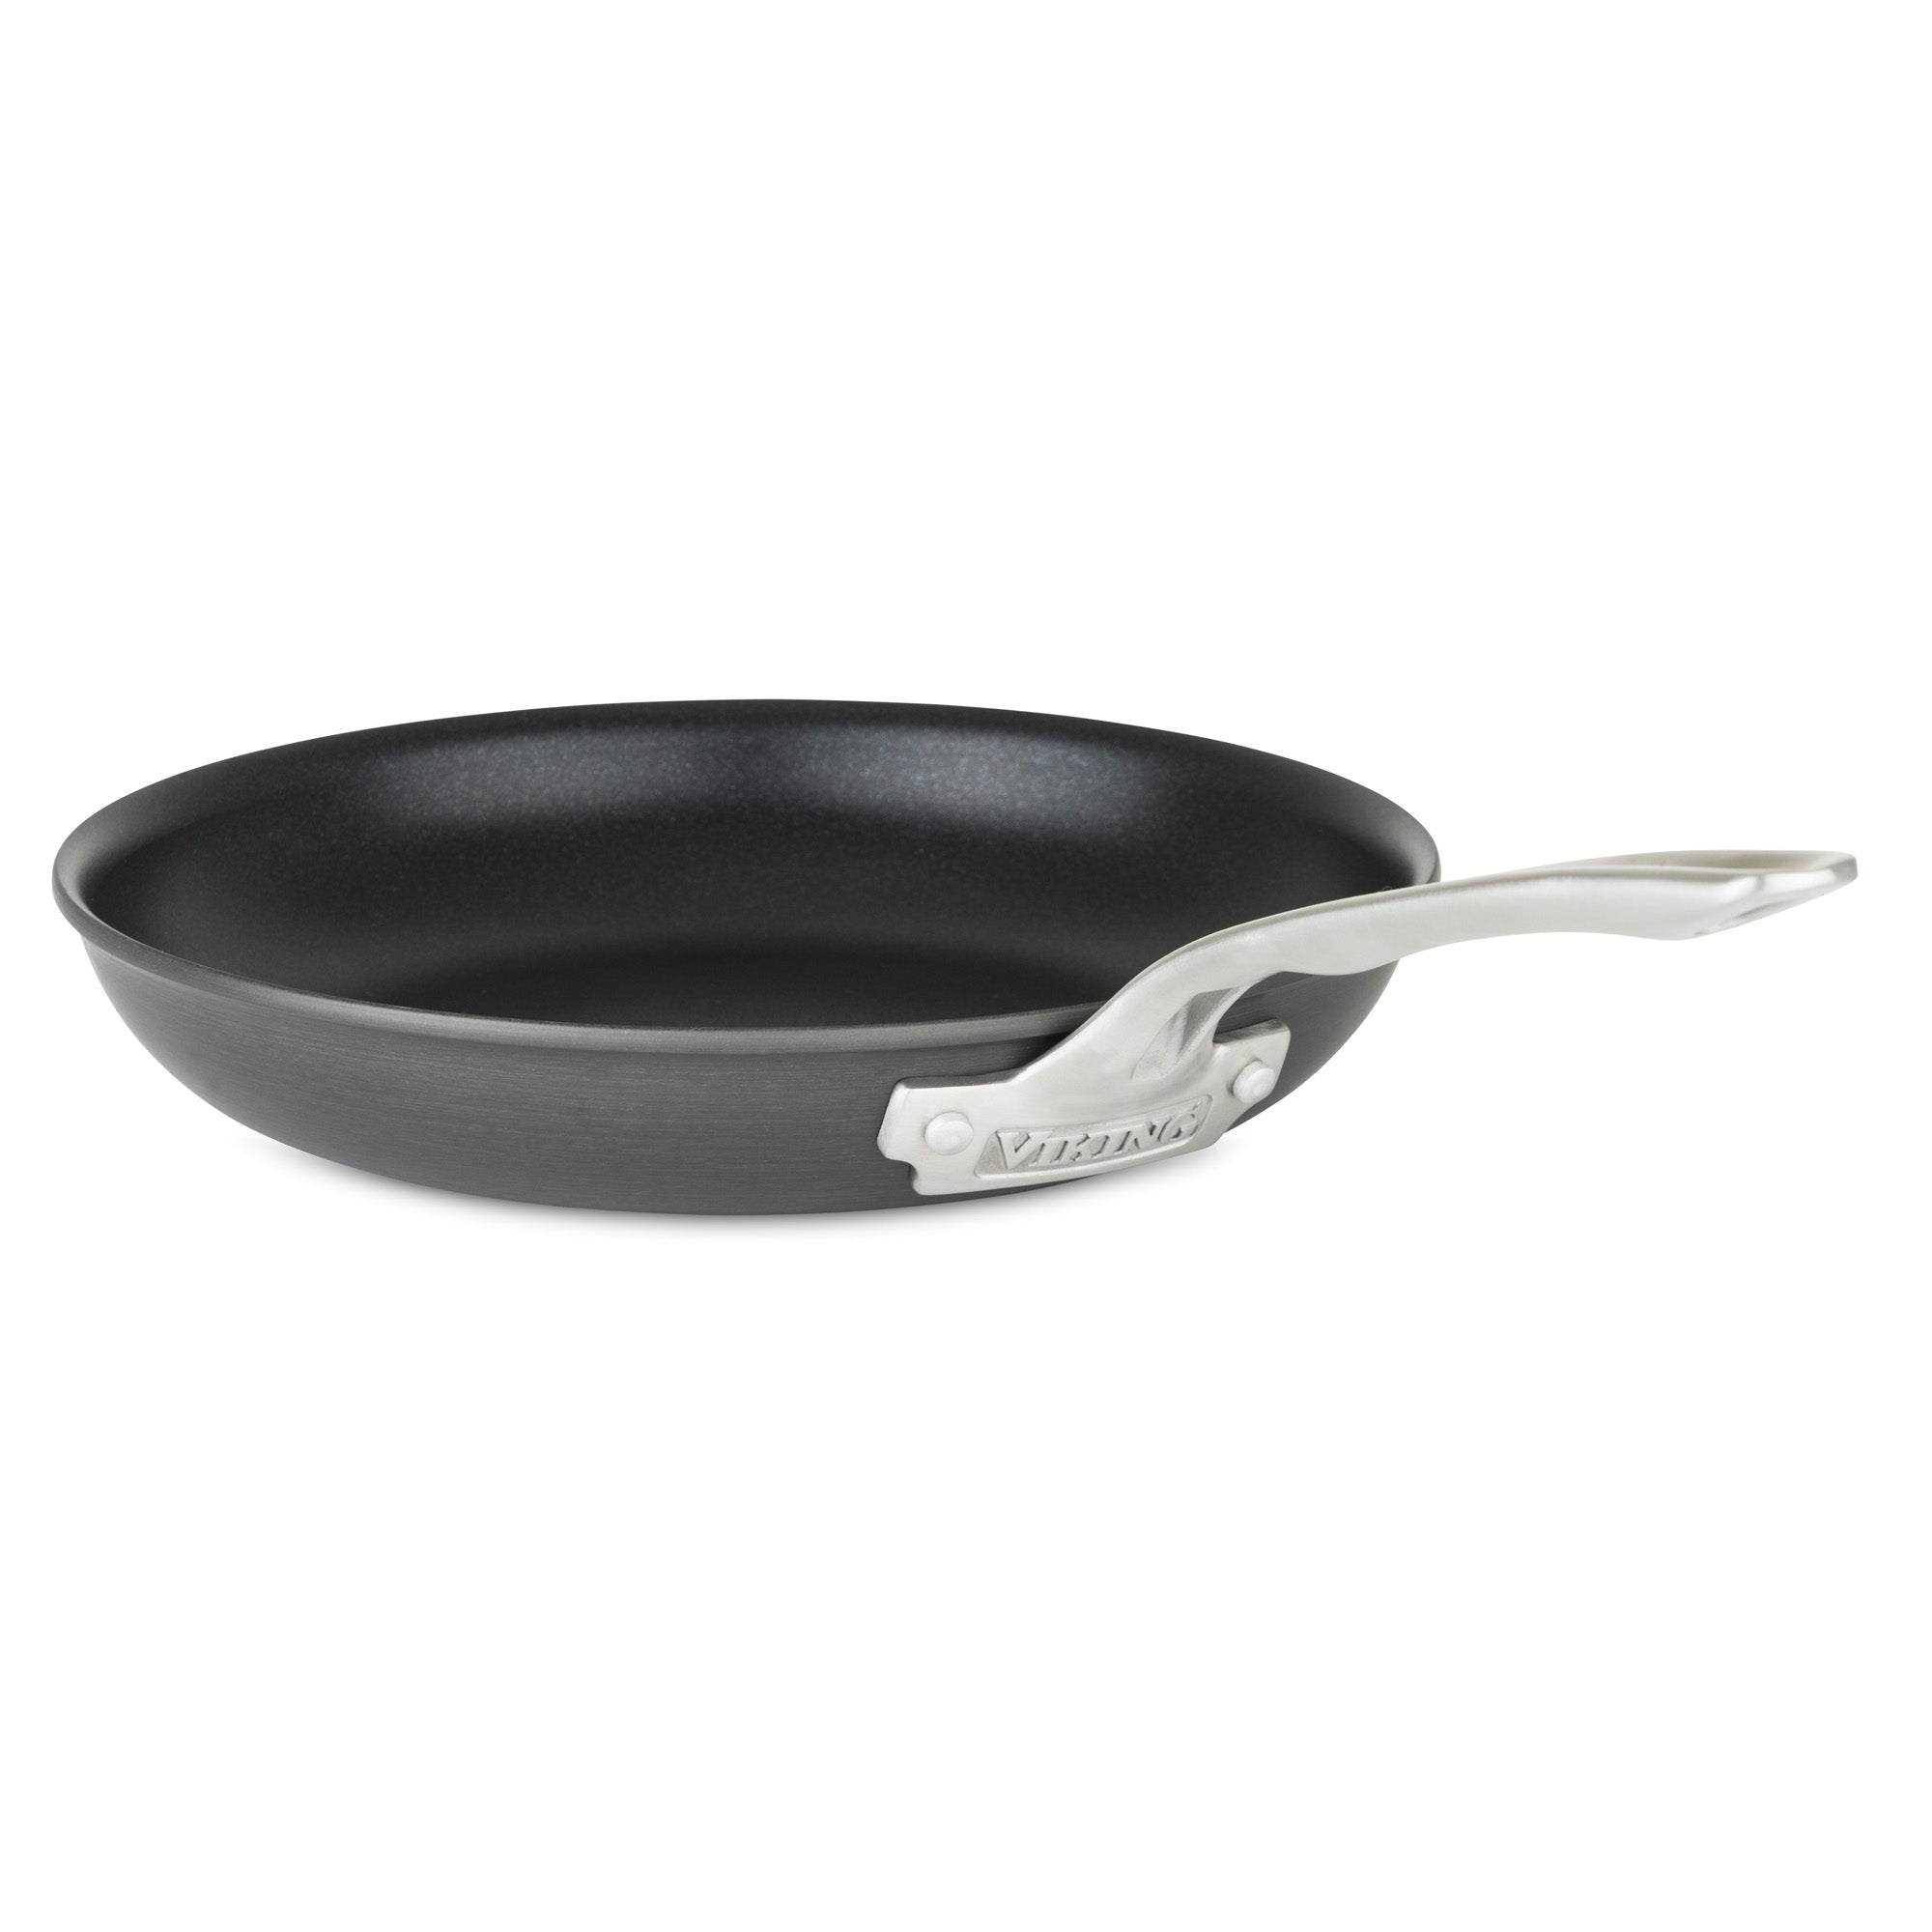 Hard-Anodized Nonstick Frying Pan Set, 10-Inch and 12-Inch Frying